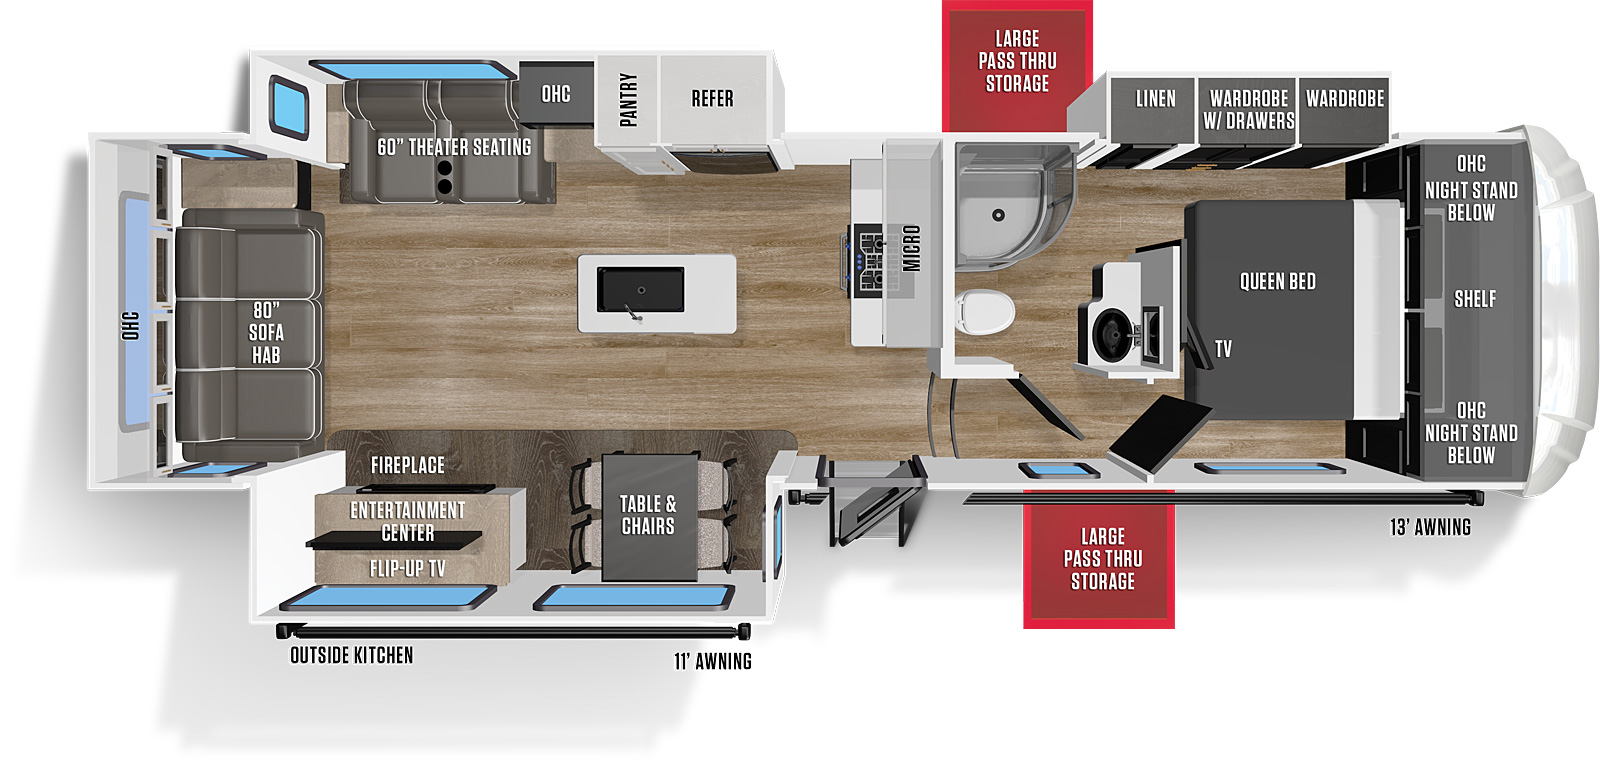 The Wildcat 298RLS floorplan exterior sports a 13 foot and an 11 foot electric power awning. This floorplan has three slide outs. It also features an outside kitchen on the door side. Located toward the center of the RV, the entry door leads to a living area on the left and steps leading to a hallway on the right. In the living area on the off-door slide out, is a 60” theater sofa to the left and an end table with storage above in the center. A pantry and refrigerator are housed to the right of the end table. A kitchen island with a sink and countertop is toward the front center of the living area. The front wall of the living area features a stove with countertop and microwave storage above. Steps on the door side of the living room lead to a hallway with the bathroom to the left and the bedroom straight ahead. In the front of the living area on the door side, is an L-shaped Counter top with a stove and sink. In the door side slide out, directly to the left of the entry door is a table with four freestanding chairs. To the left of the table is an entertainment center with flip-up TV and an electric fireplace below. The rear of the living area features an 80 inch sofa hide-a-bed with overhead cabinets above. The front of the RV features a bathroom with a shower, toilet, sink, linen storage and sliding door to the bedroom. The bedroom houses a front queen bed with nightstands and wardrobes on either side. A slide out on the off-door side wardrobes and linen storage.